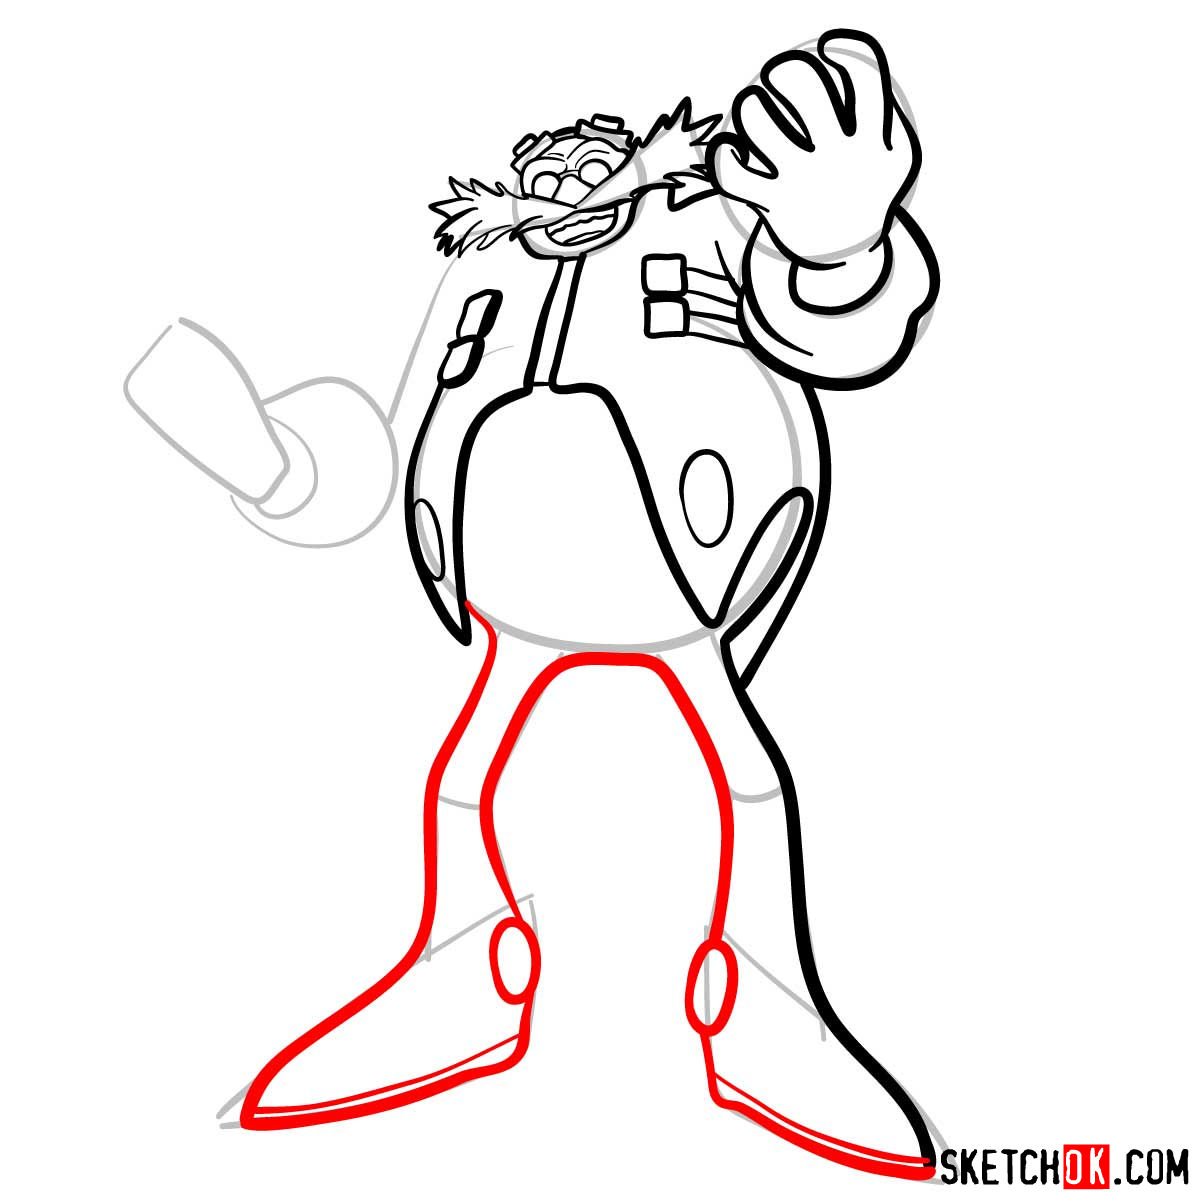 How to draw Dr. Robotnik (Eggman) from Sonic the Hedgehog - step 11